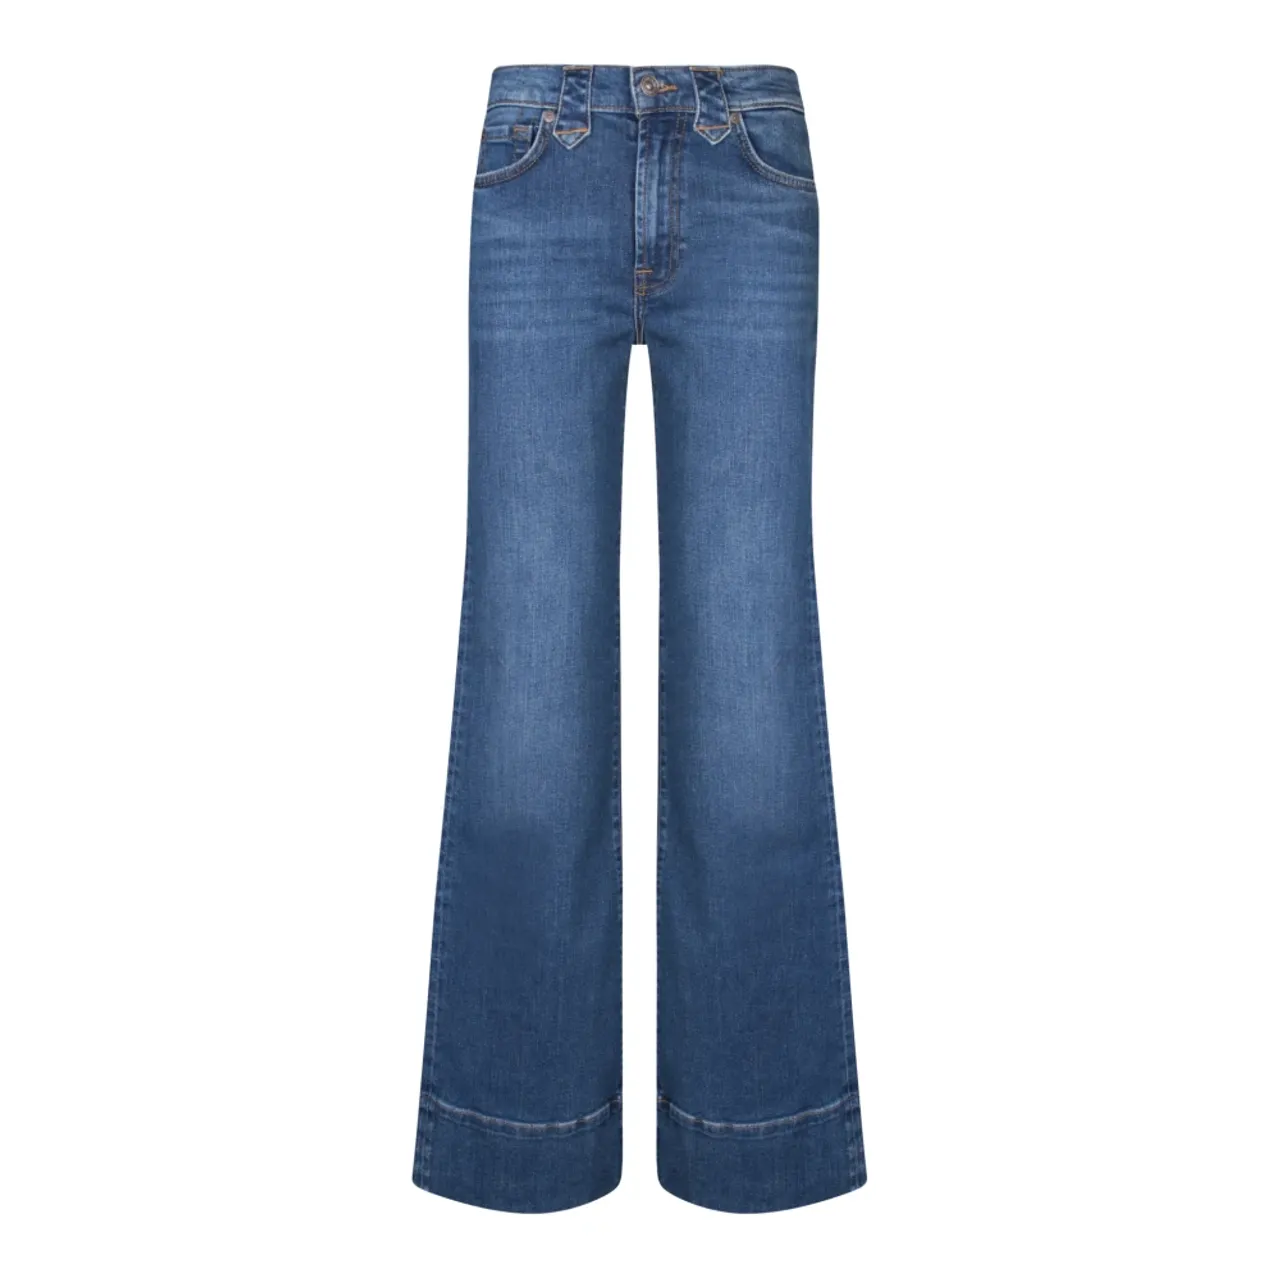 High-Rise Flared Blaue Jeans 7 For All Mankind